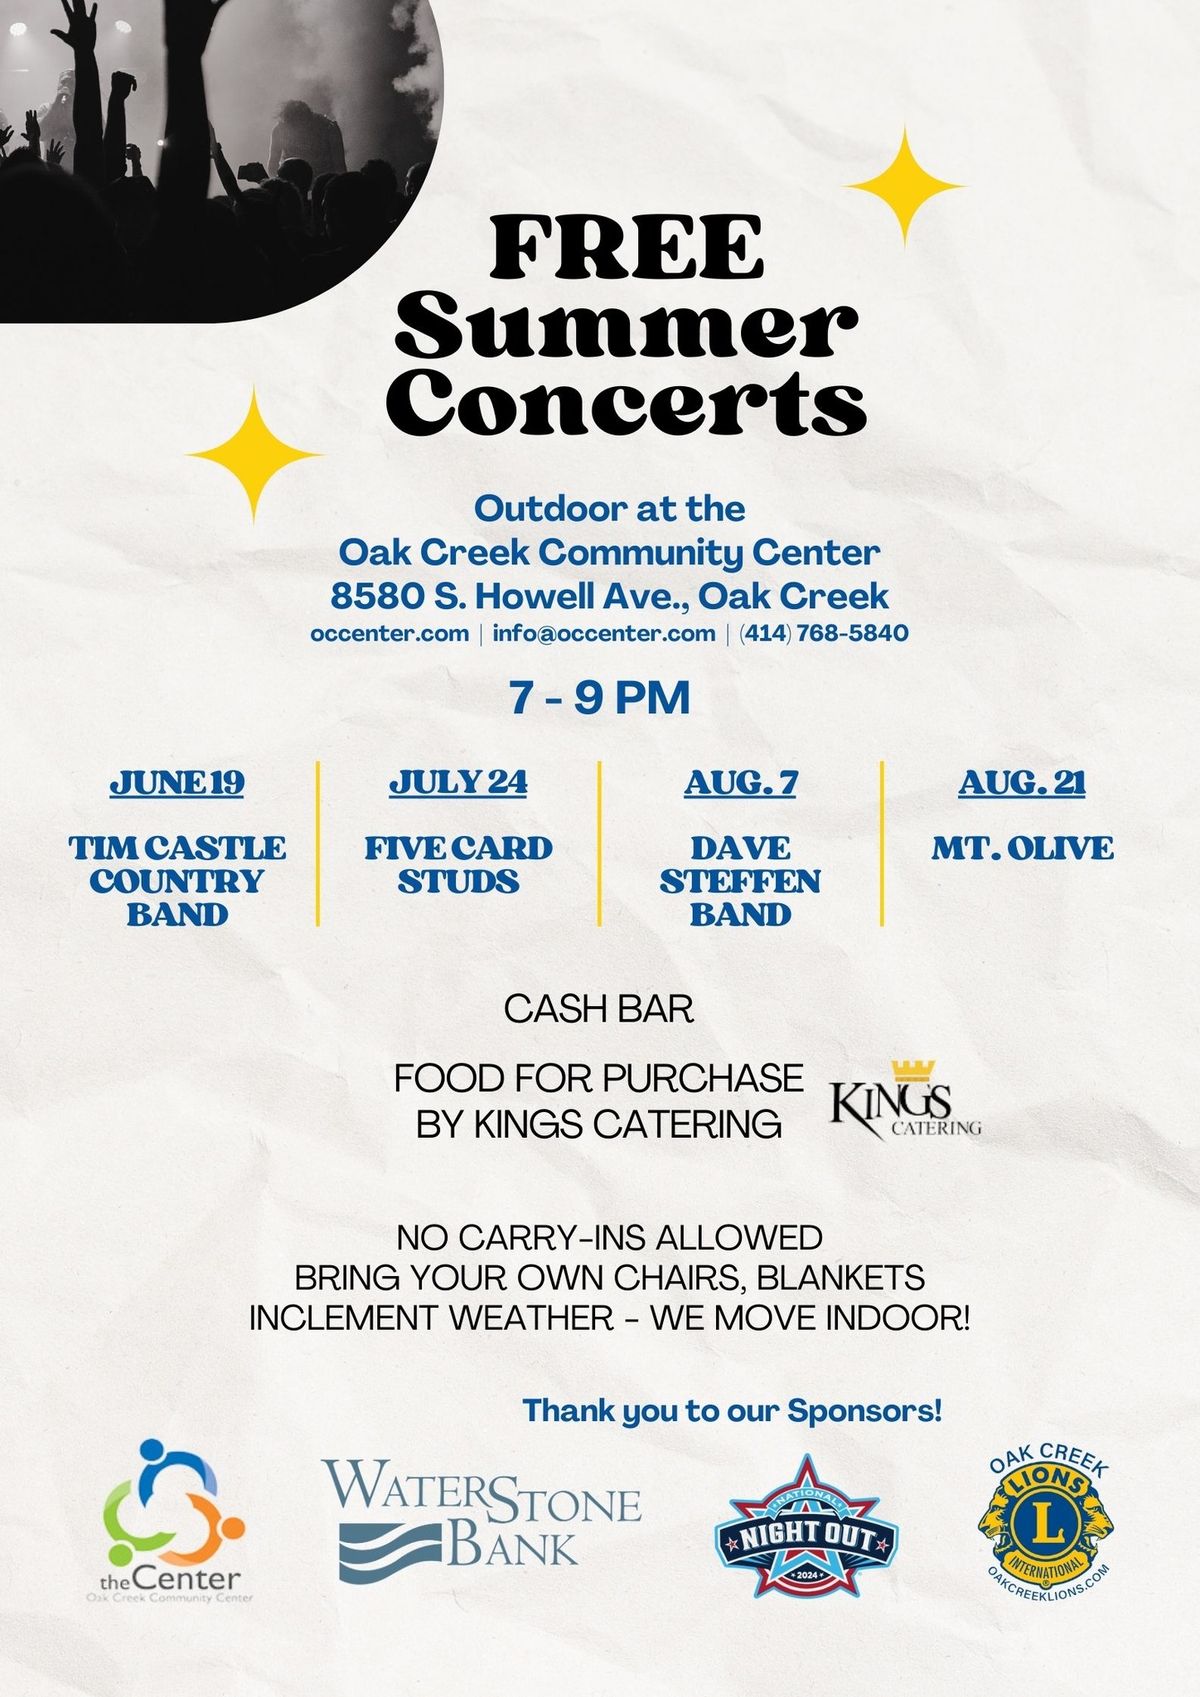 Free Summer Concerts @ the OCCC